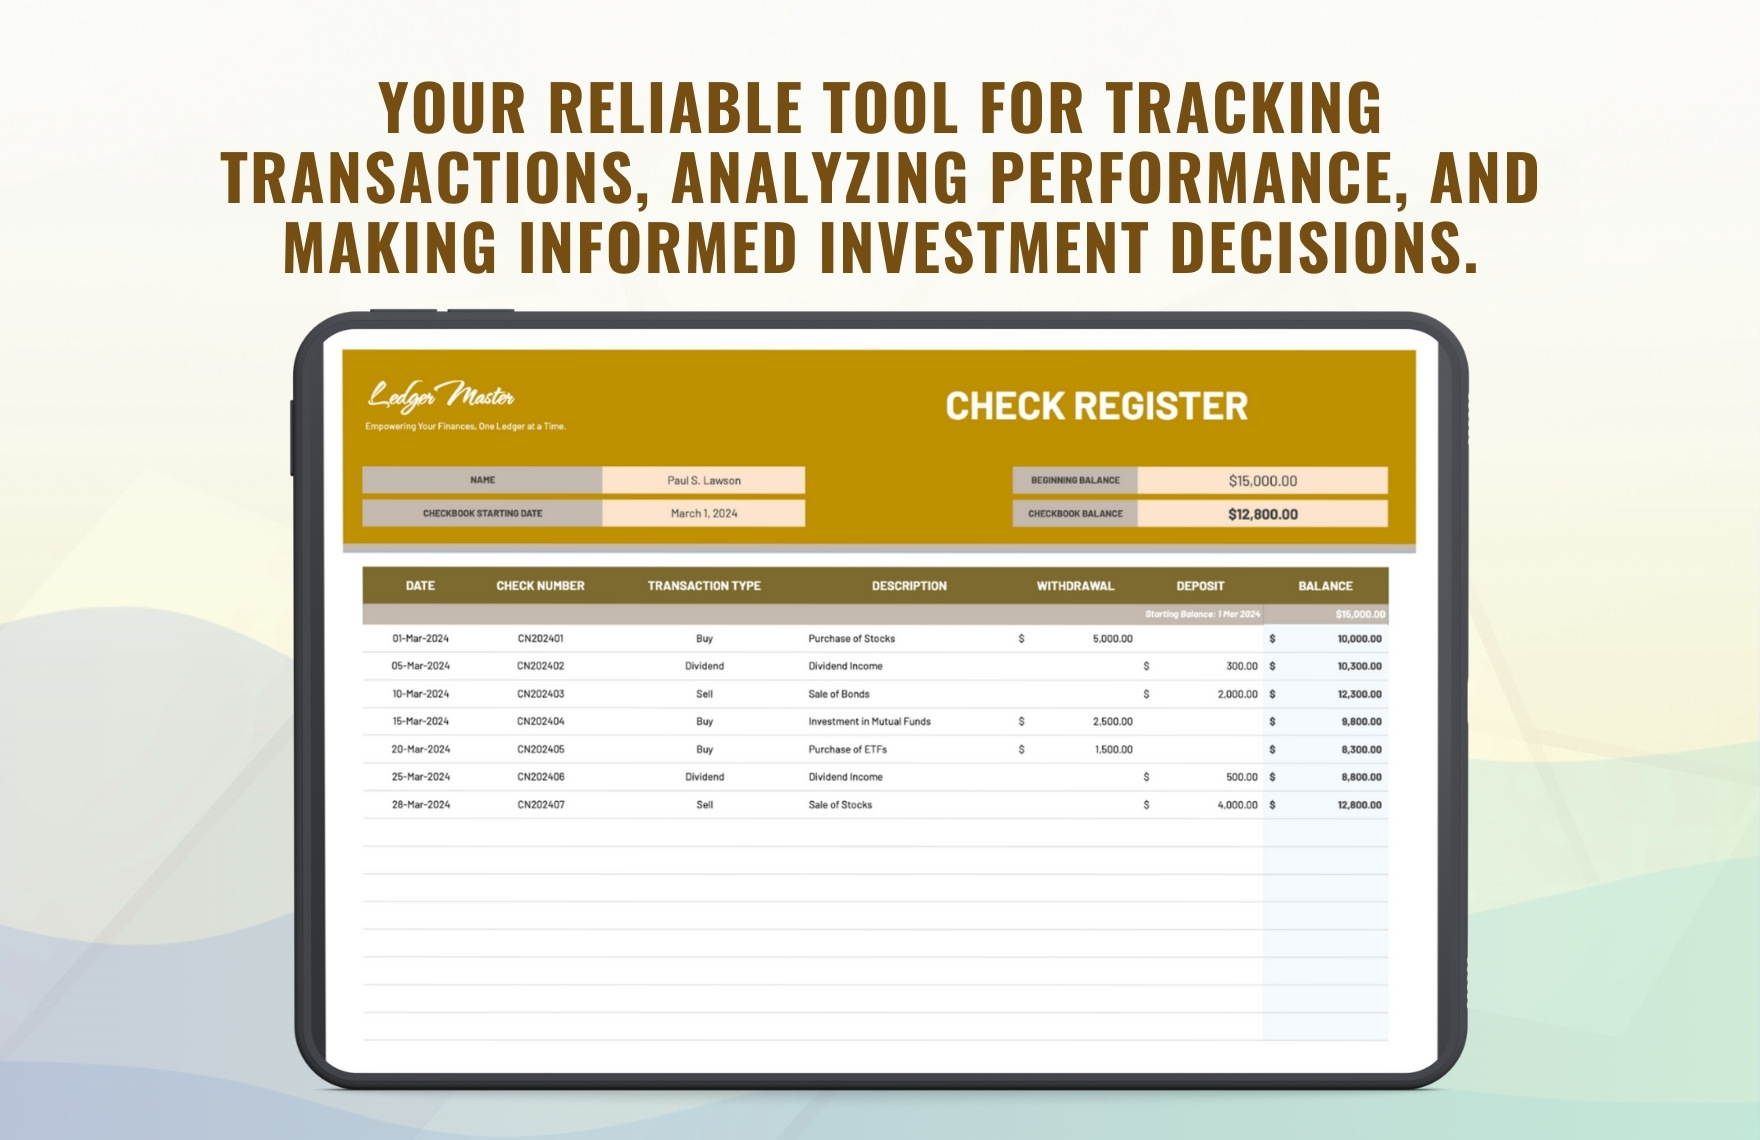 Check Register for Investment Transactions Template